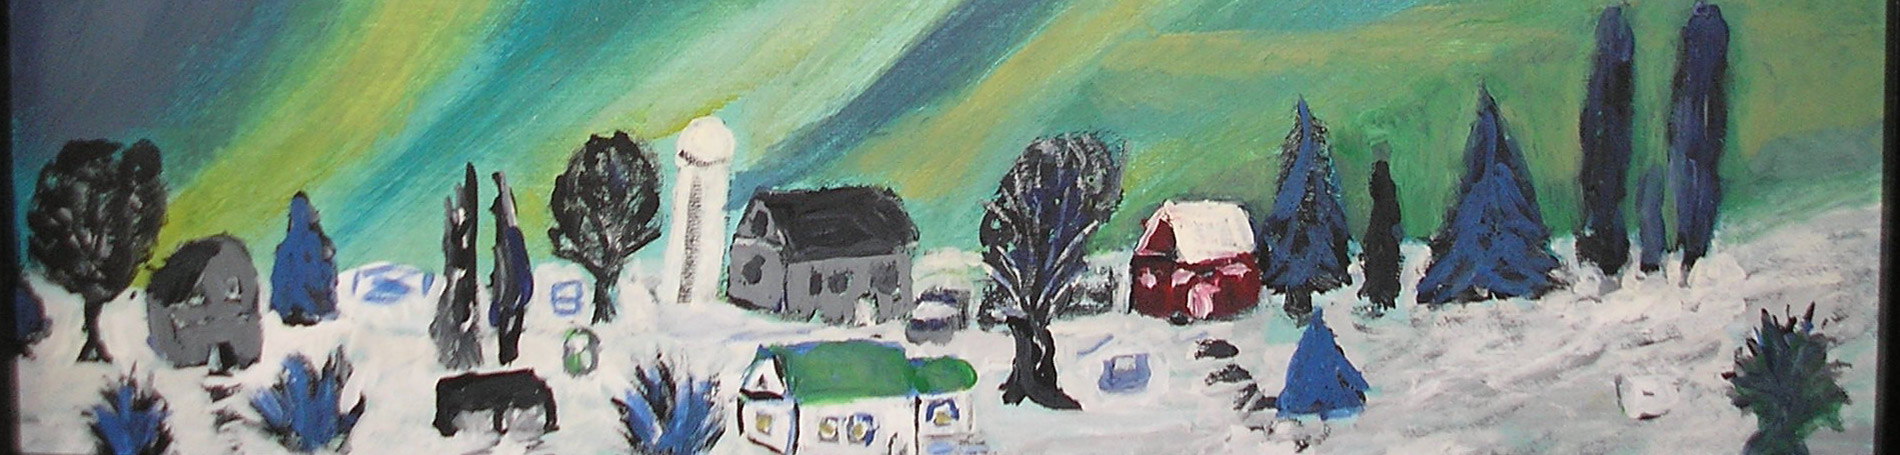 Painting of town with snow.